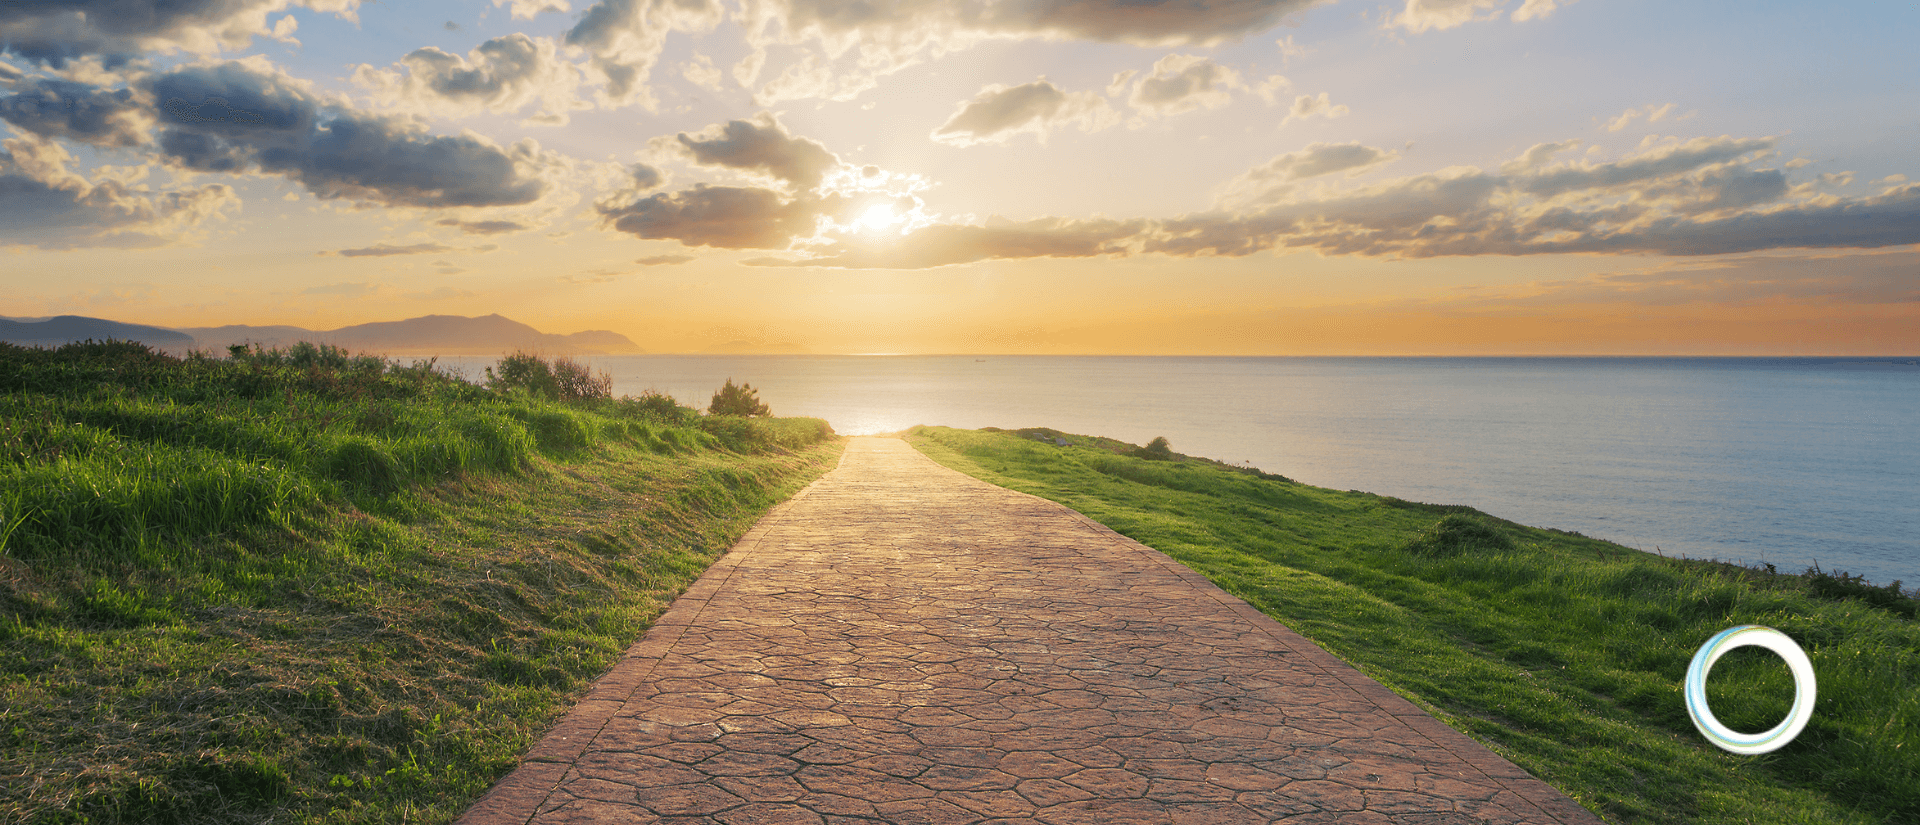 path to purpose, with sunset